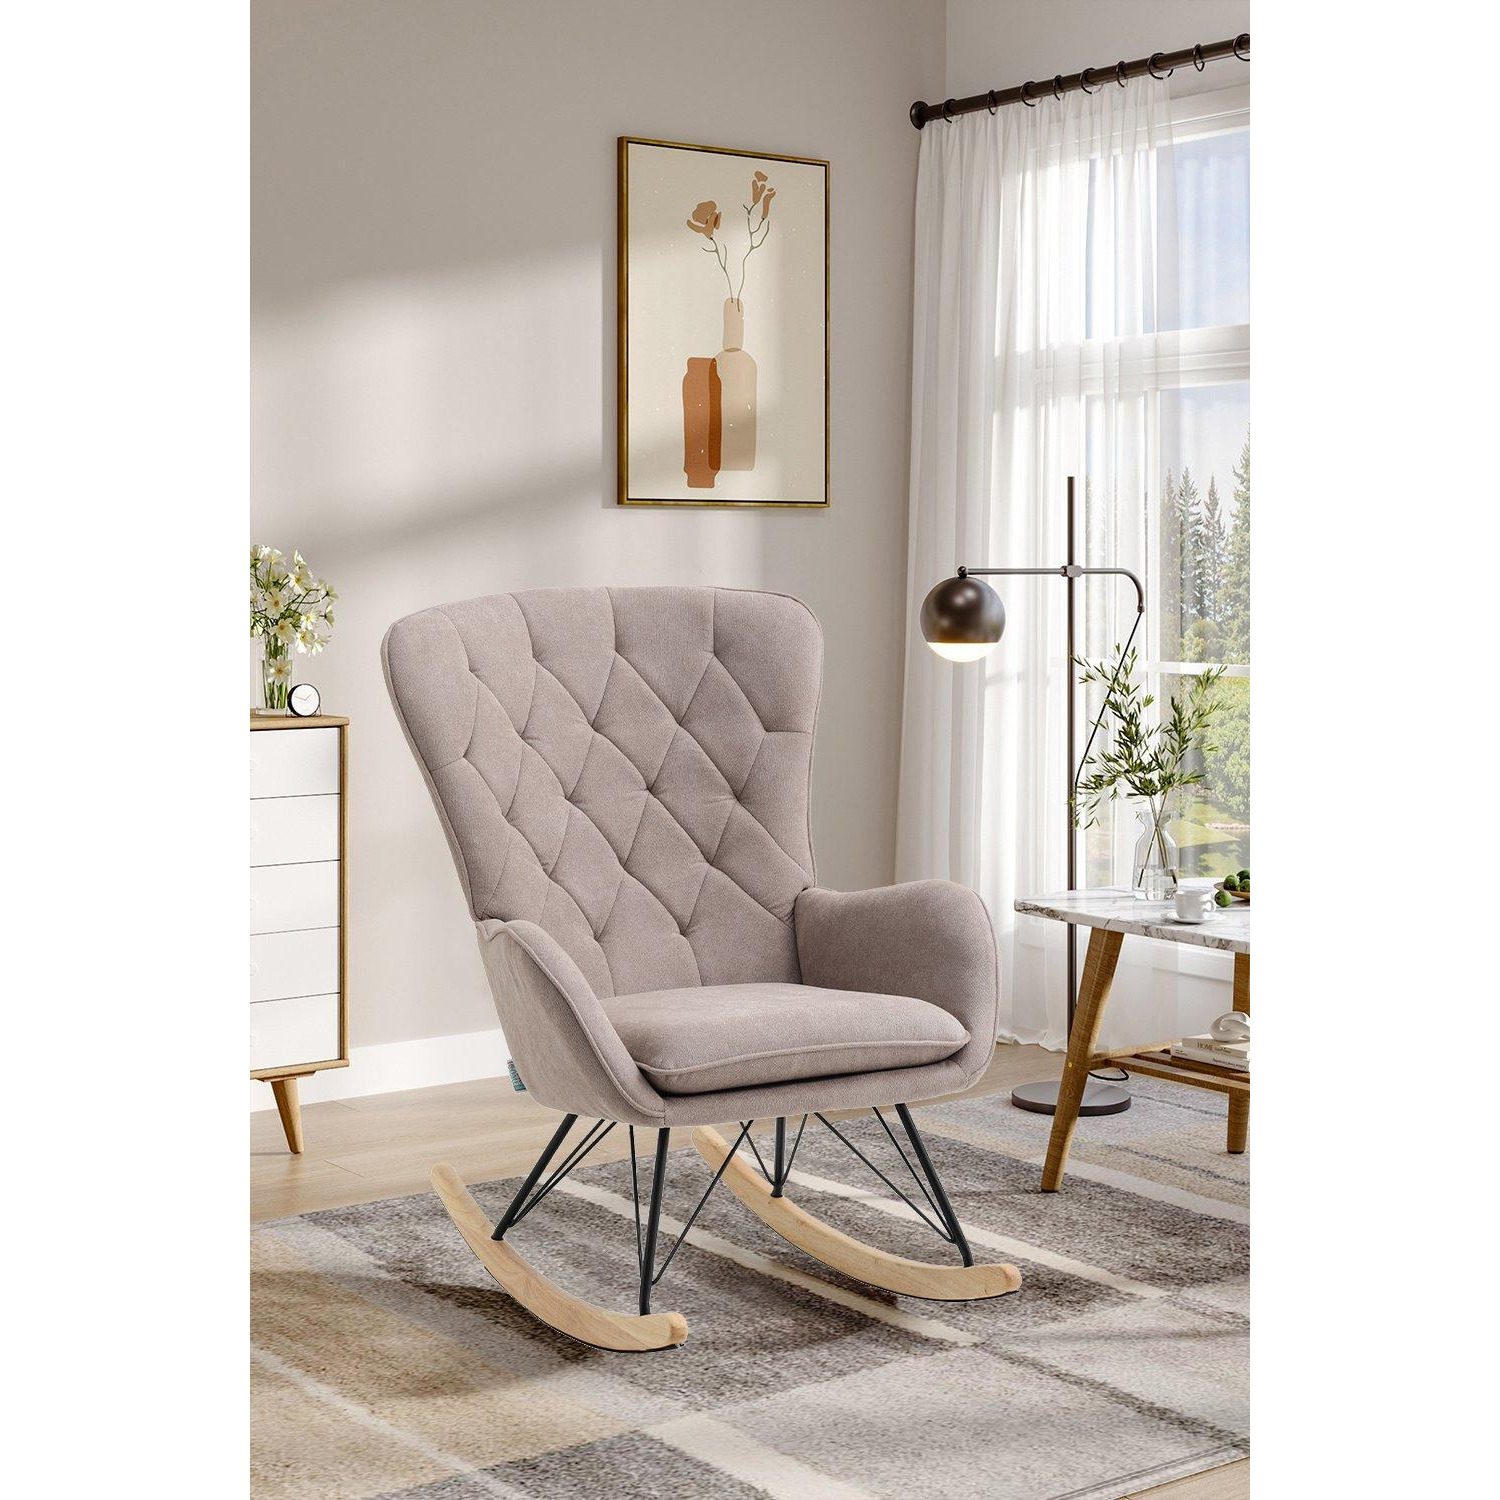 Modern Terry Cloth Diamond Check Tufted Rocking Chair - image 1